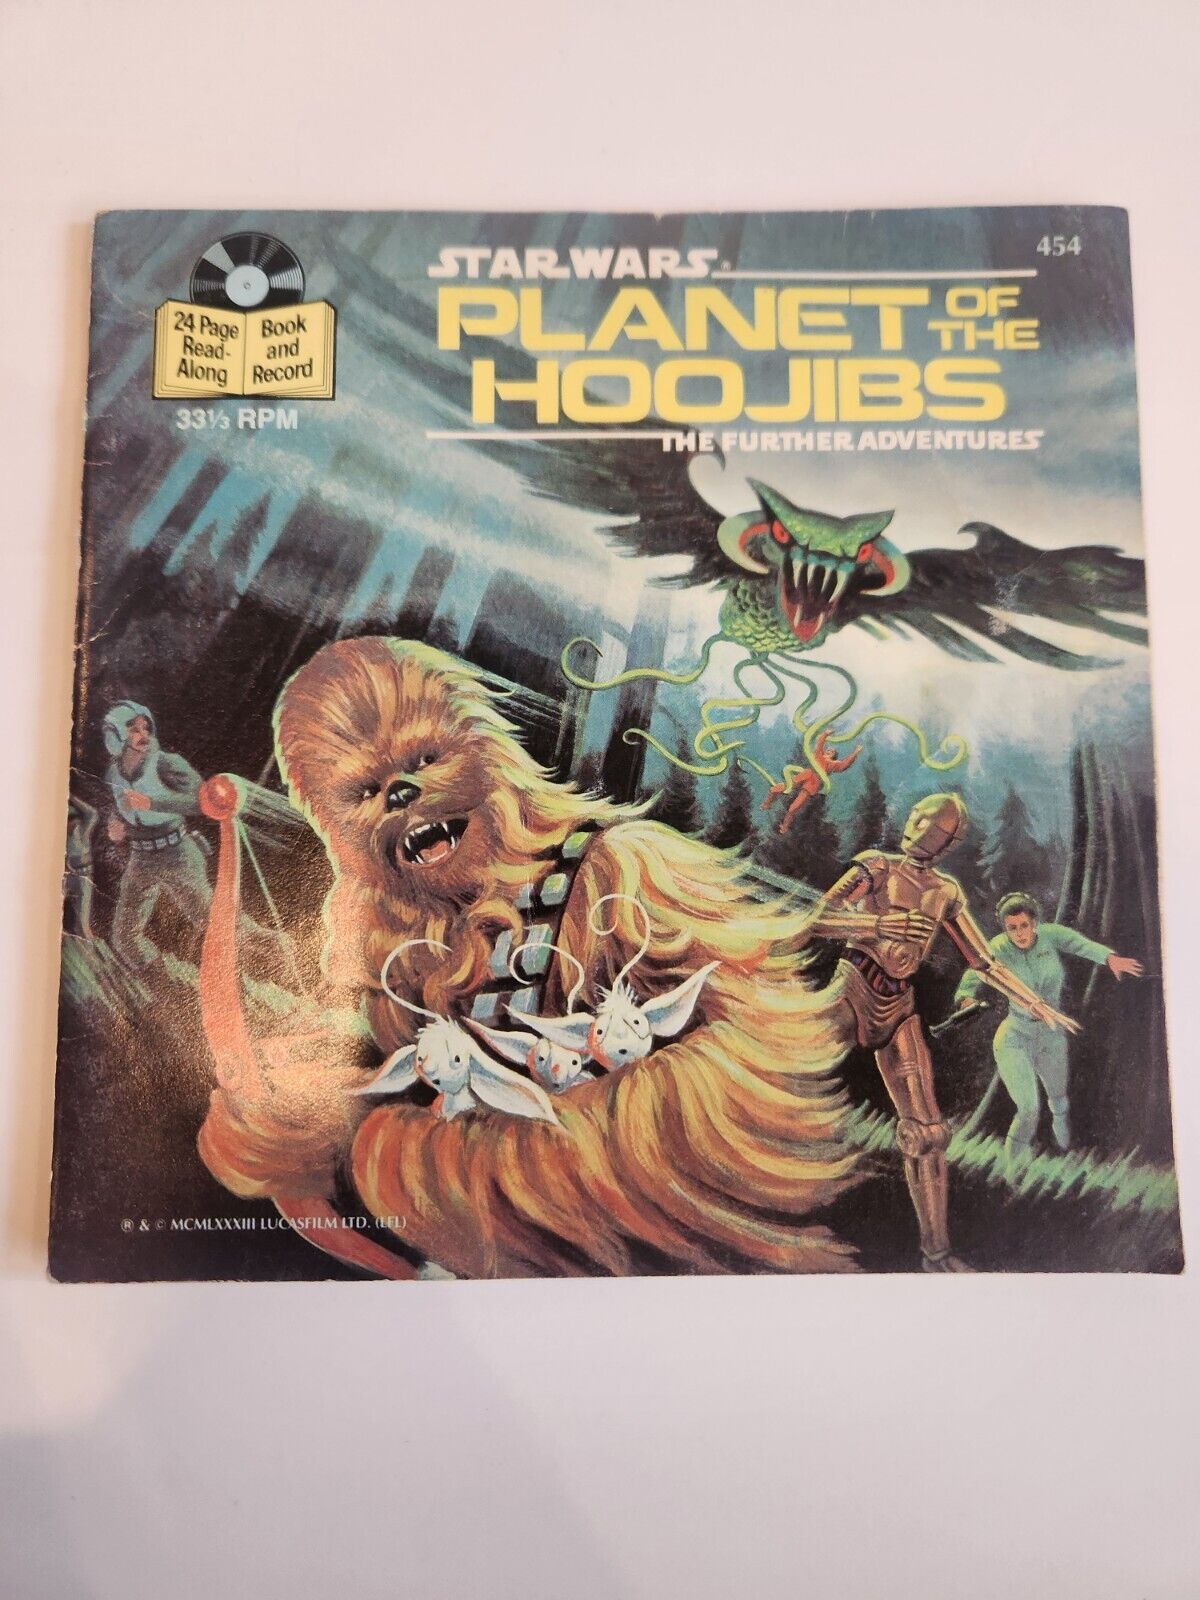 Vintage 1983 Star Wars PLANET OF THE HOOJIBS Book & Record 33 rpm